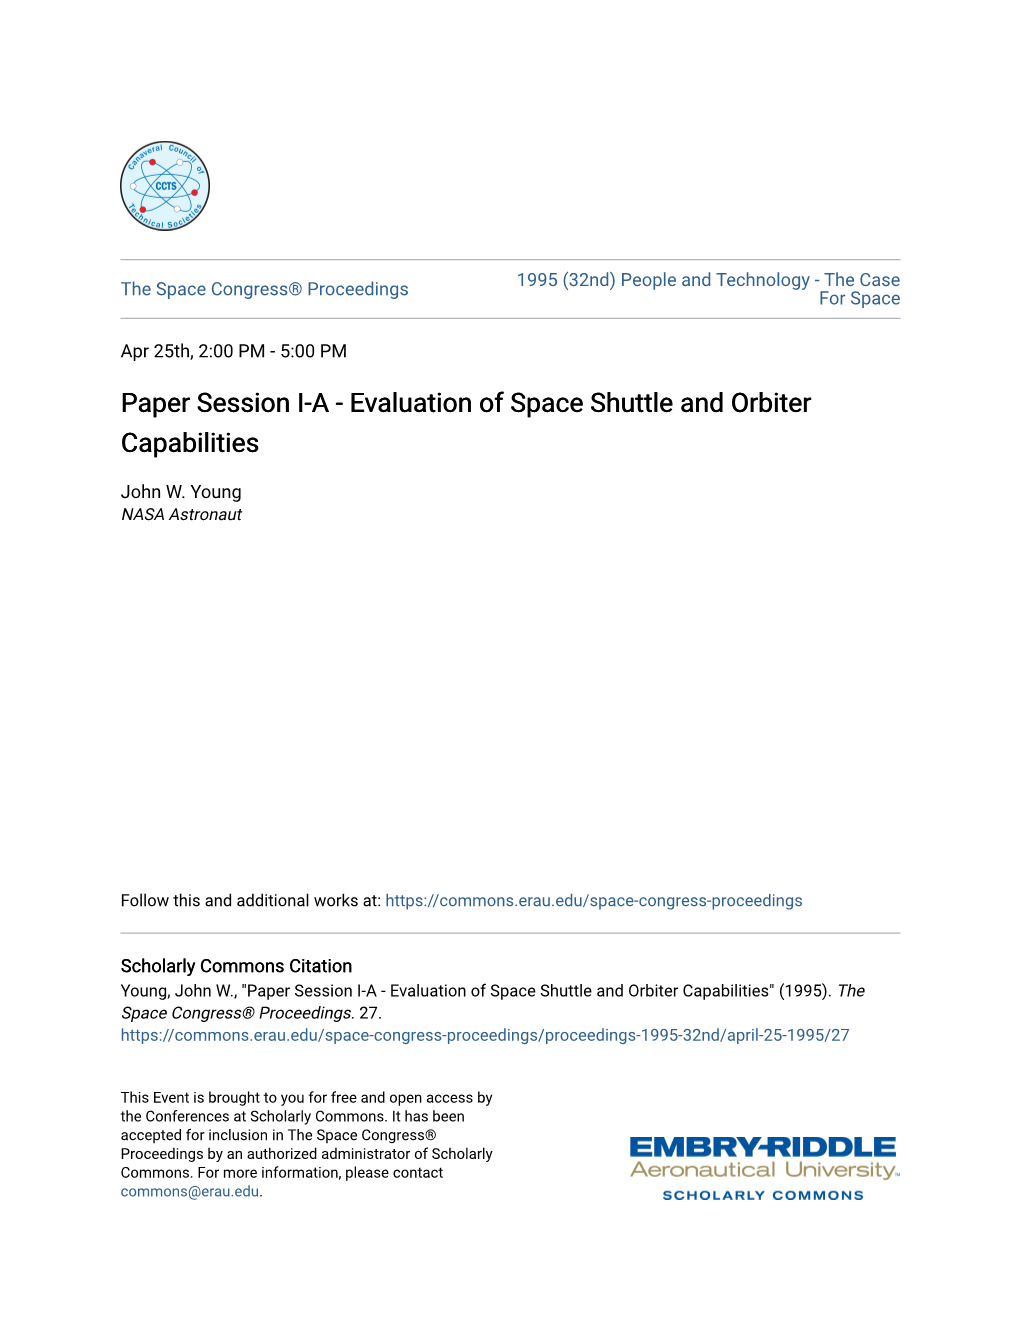 Evaluation of Space Shuttle and Orbiter Capabilities